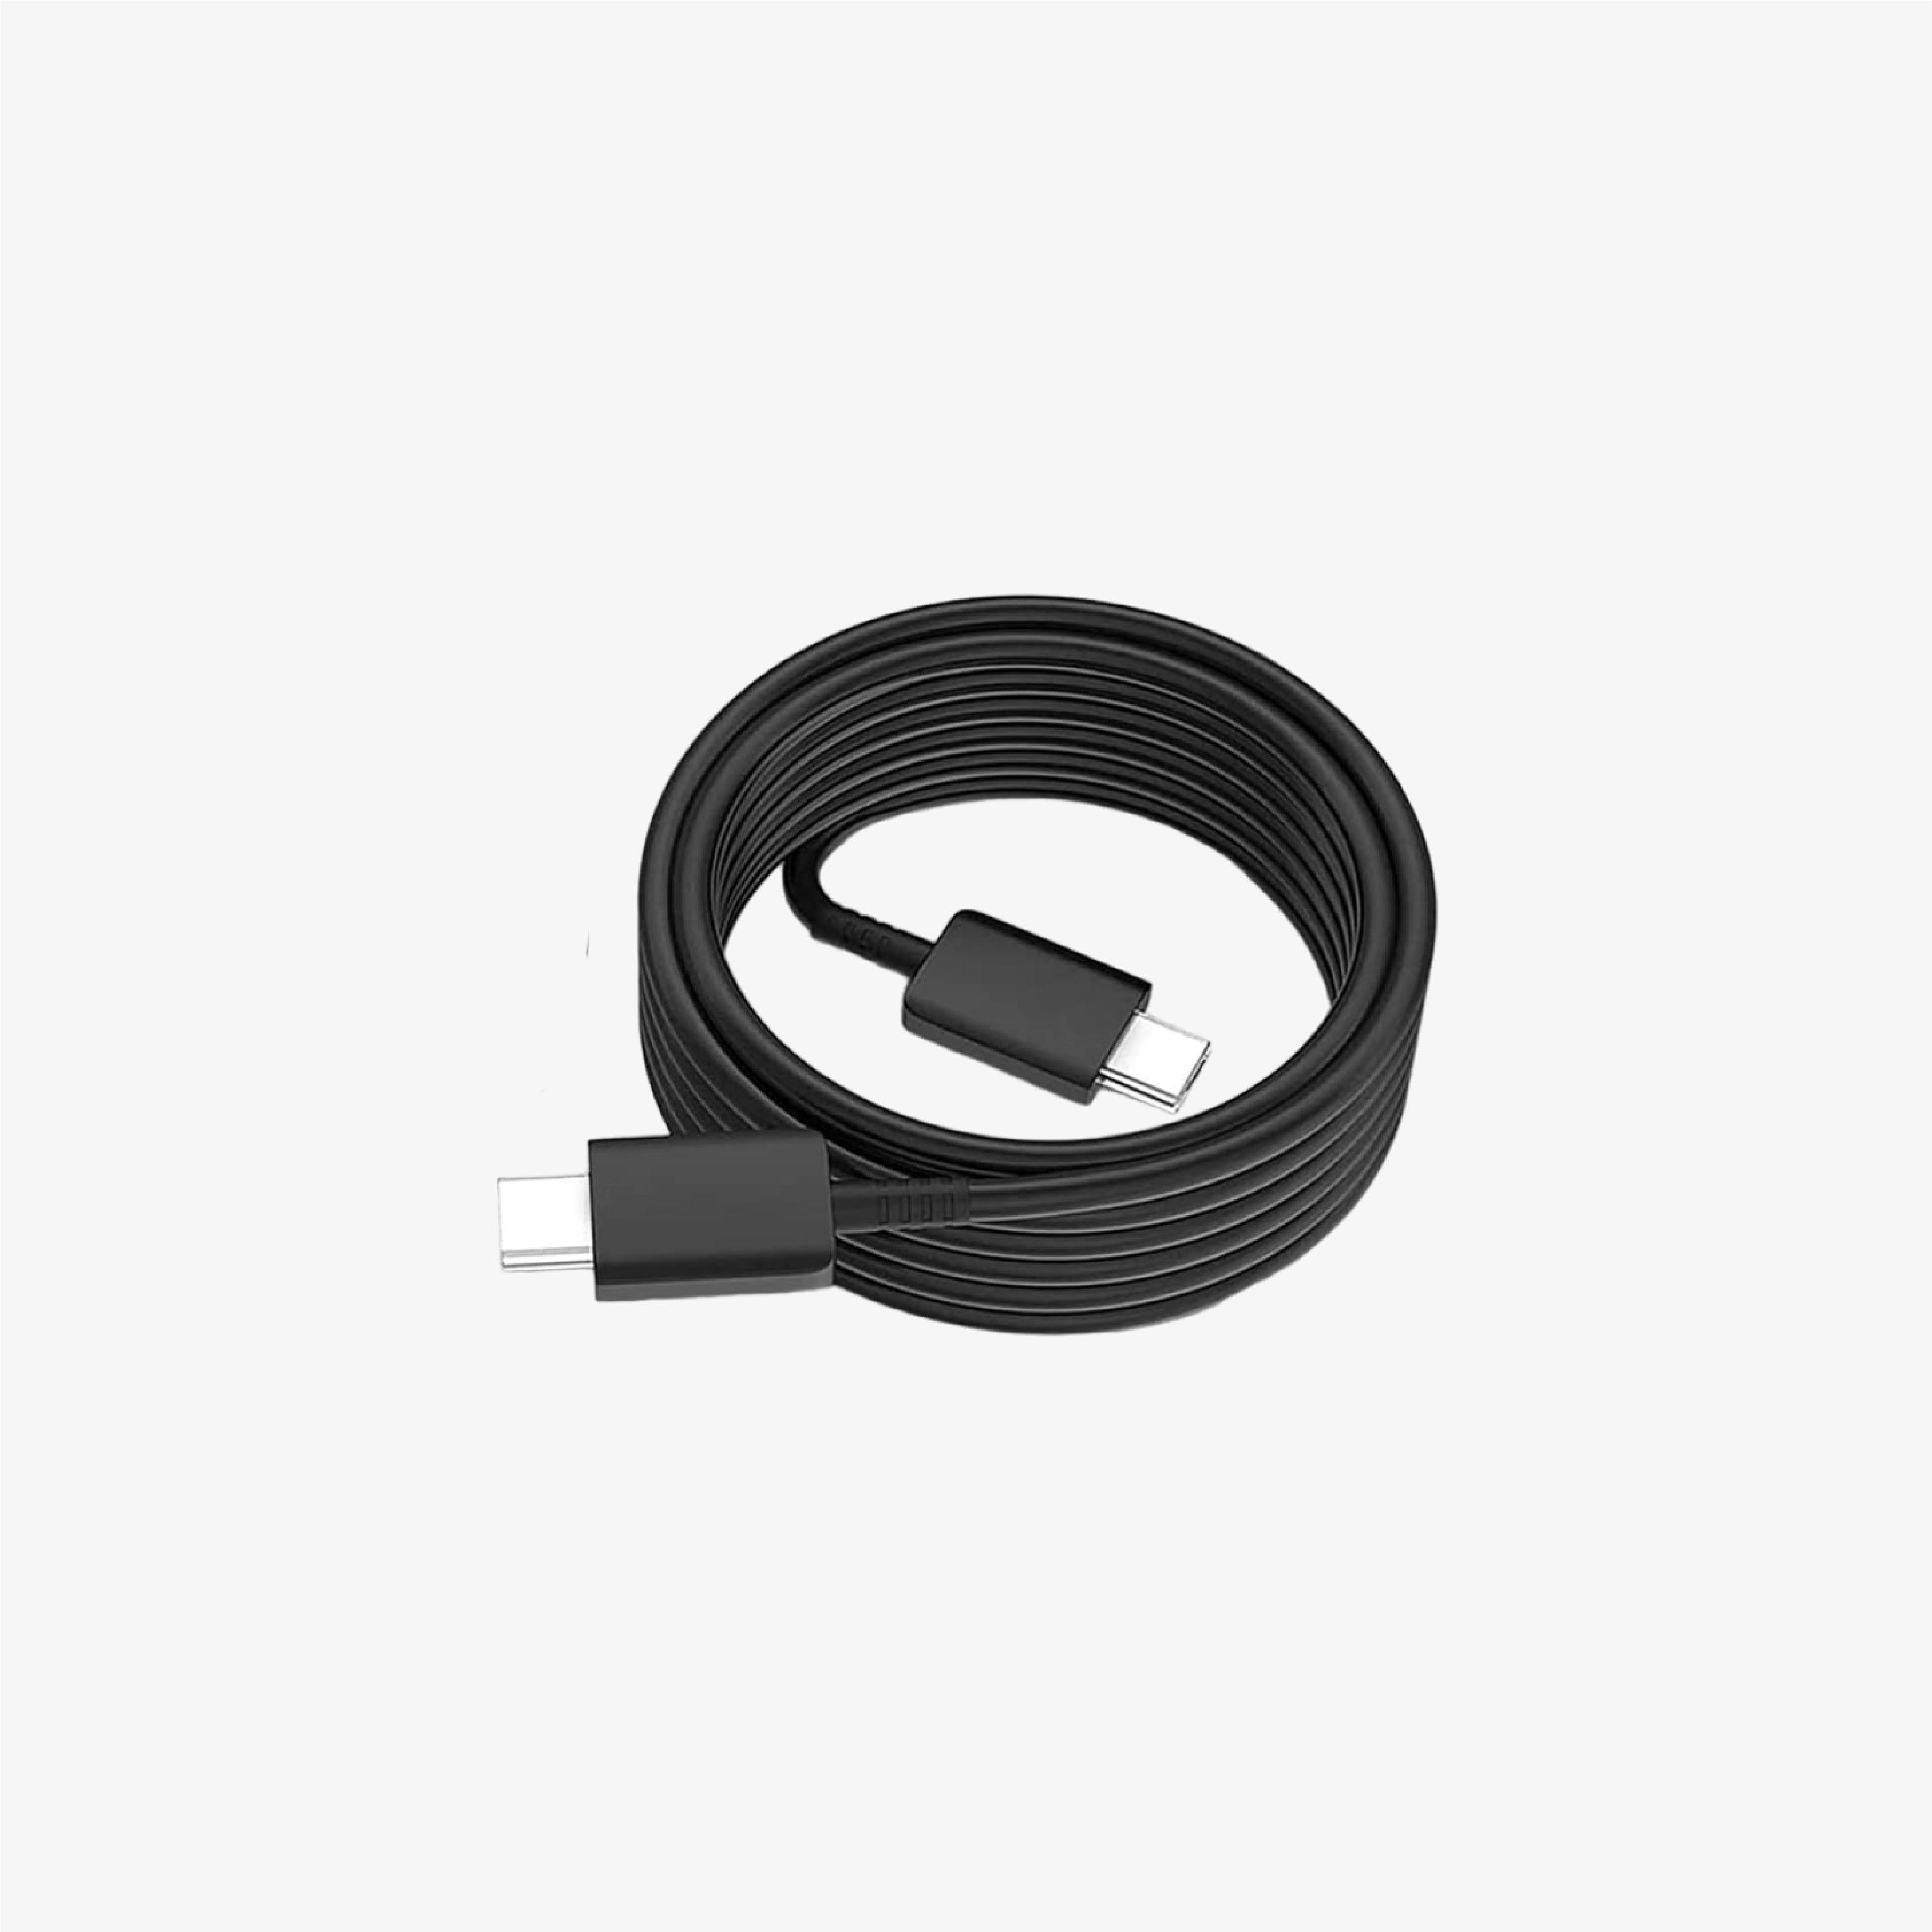 45W Samsung Adapter Set with Cable - DCTB